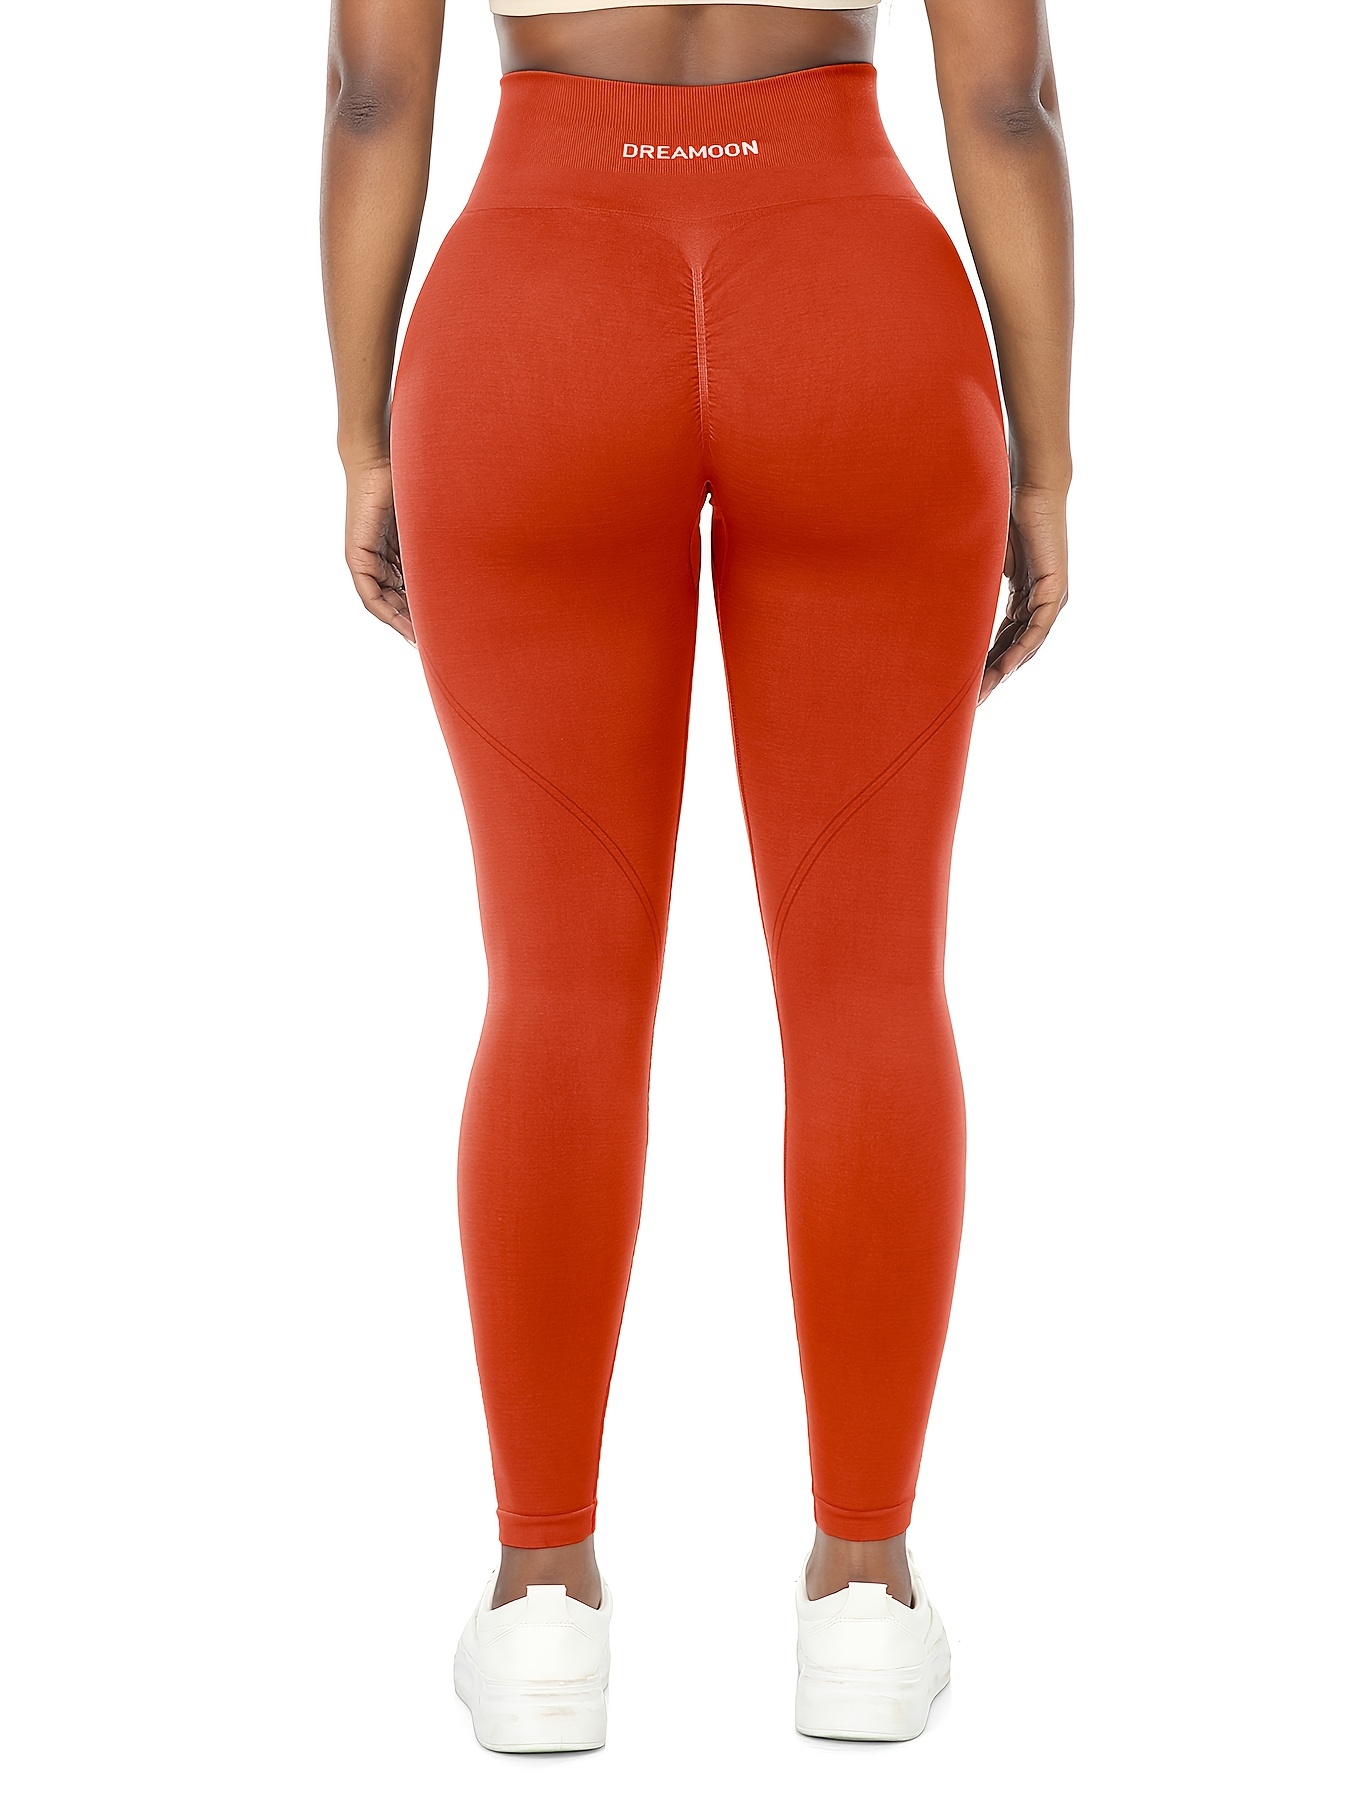 Buy DREAMOON Seamless Ribbed Leggings for Women High Waist Workout Gym  Leggings Butt Lifting Yoga Pants Booty Tights, #0 Ribbed Knit Orange, Large  at